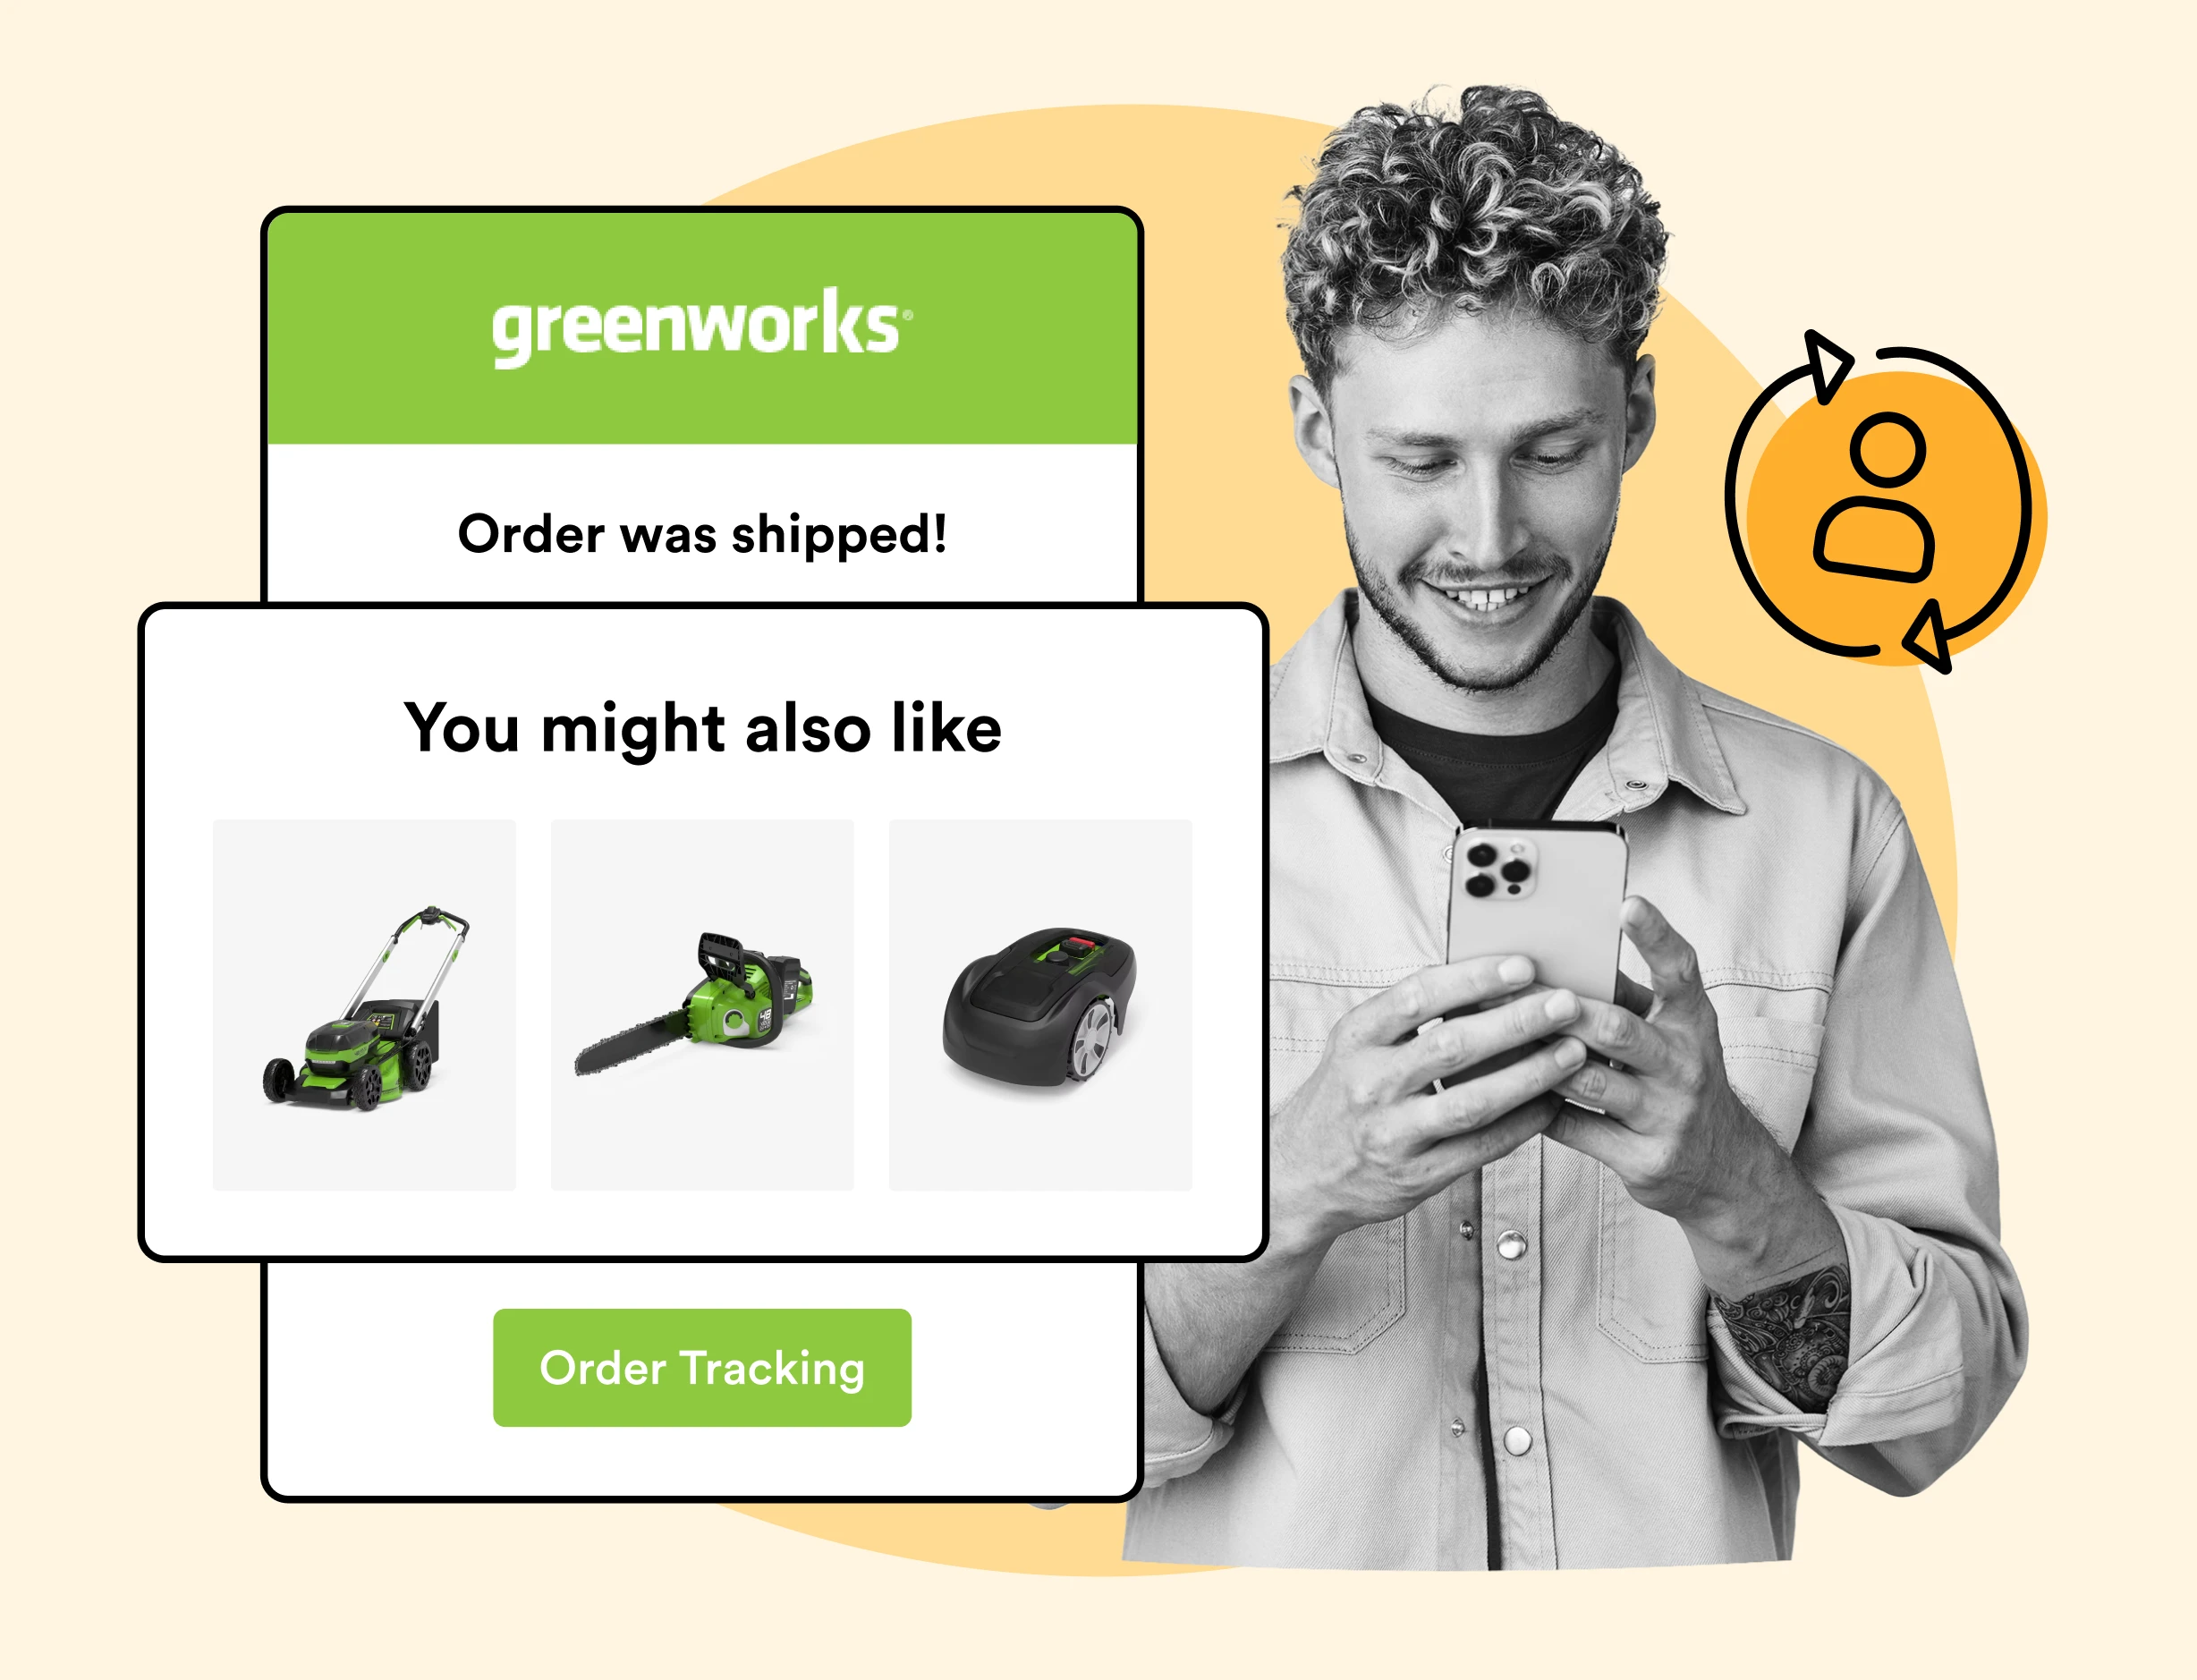 greenworks using WeSupply product recommendations